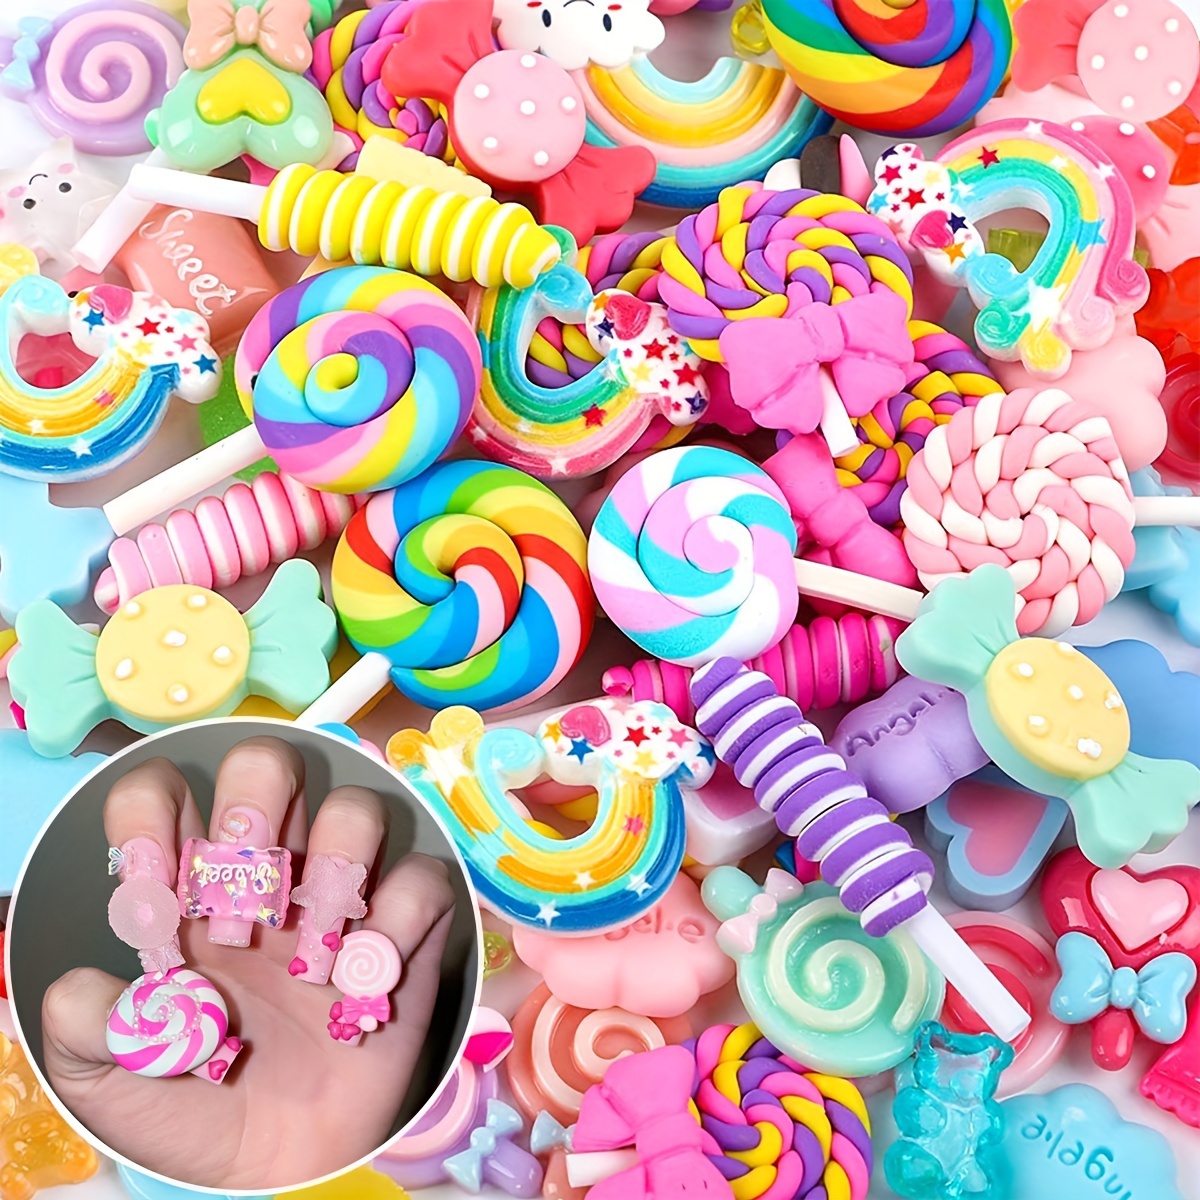 30pcs Resin Nail Charms 3D Cute Bear Lollipop Candy Jewelry fOR